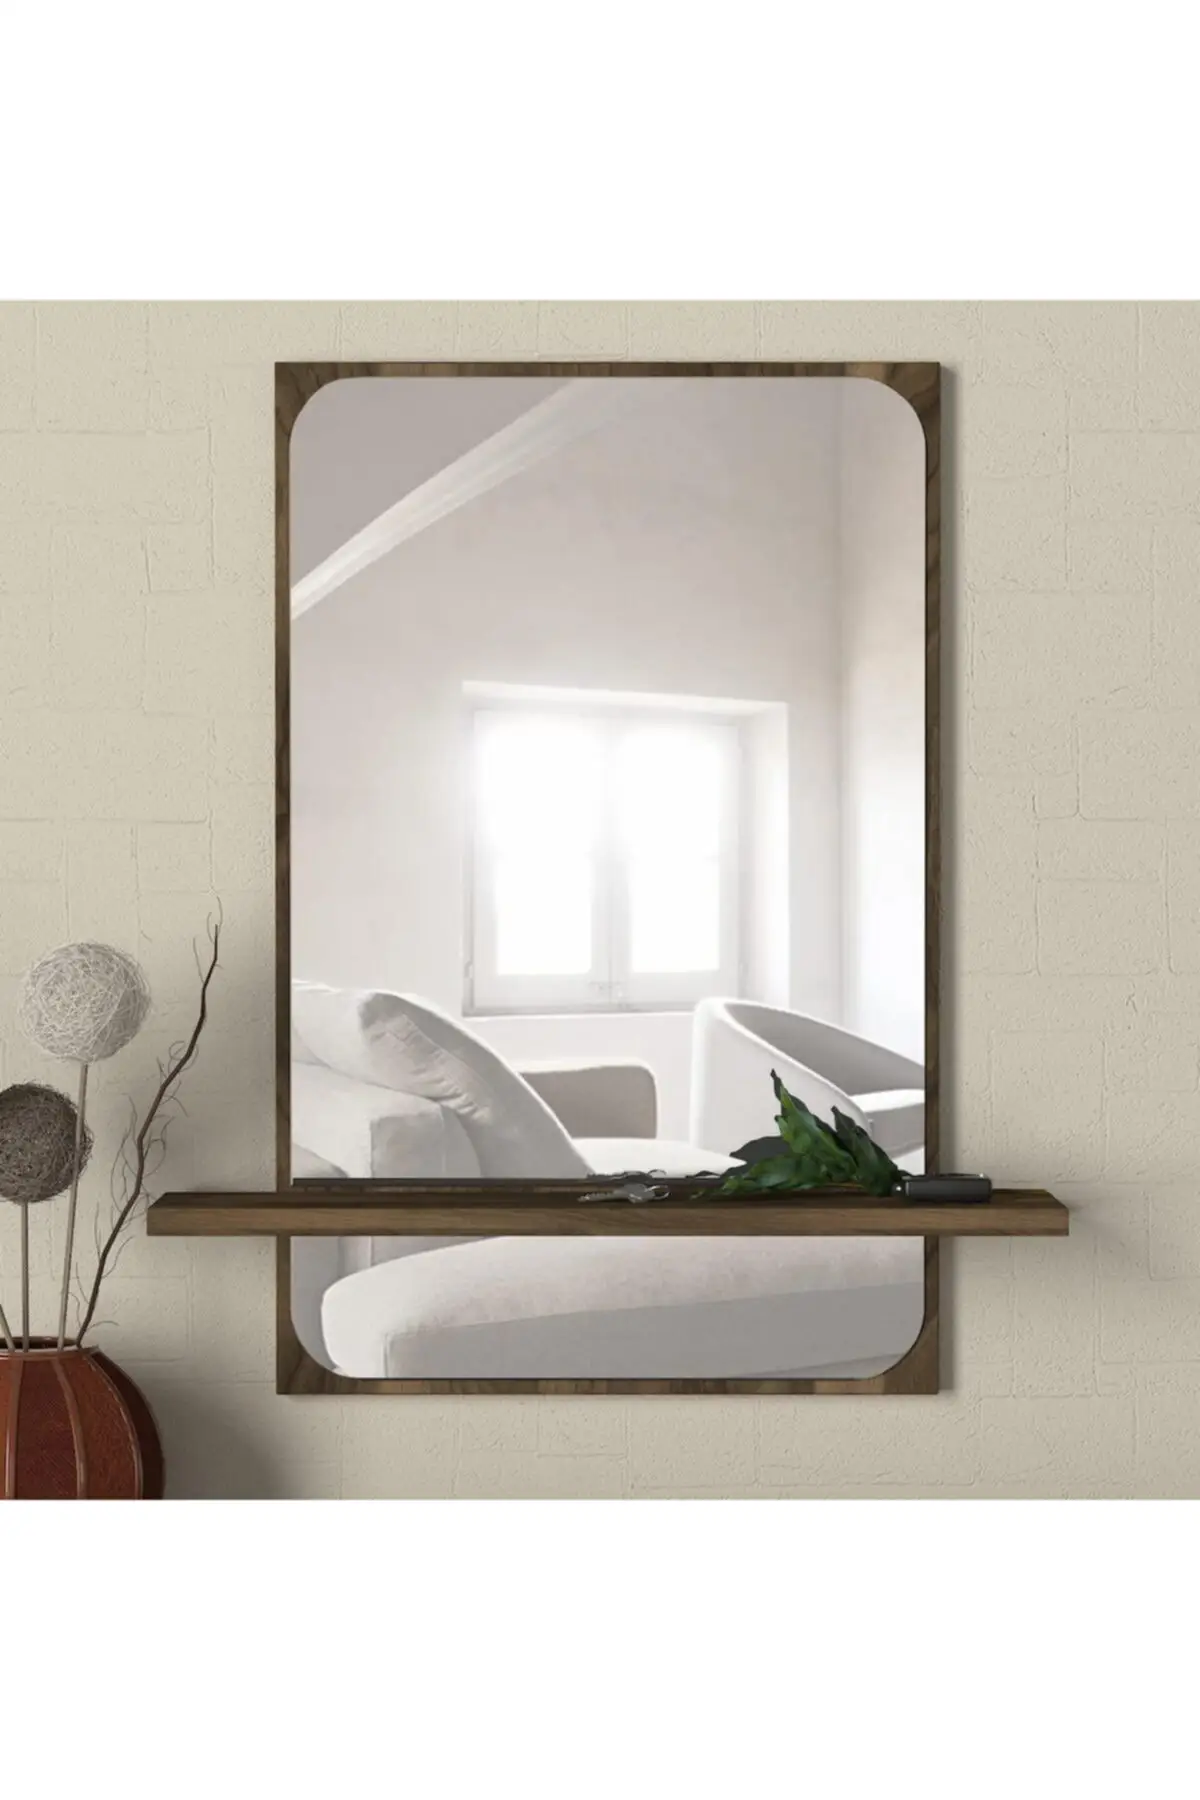 Decorative Wall Mirrors Console 45x70x12 cm Furniture Full Body Mirror Large Length Decor Bathroom Made In From Turkey